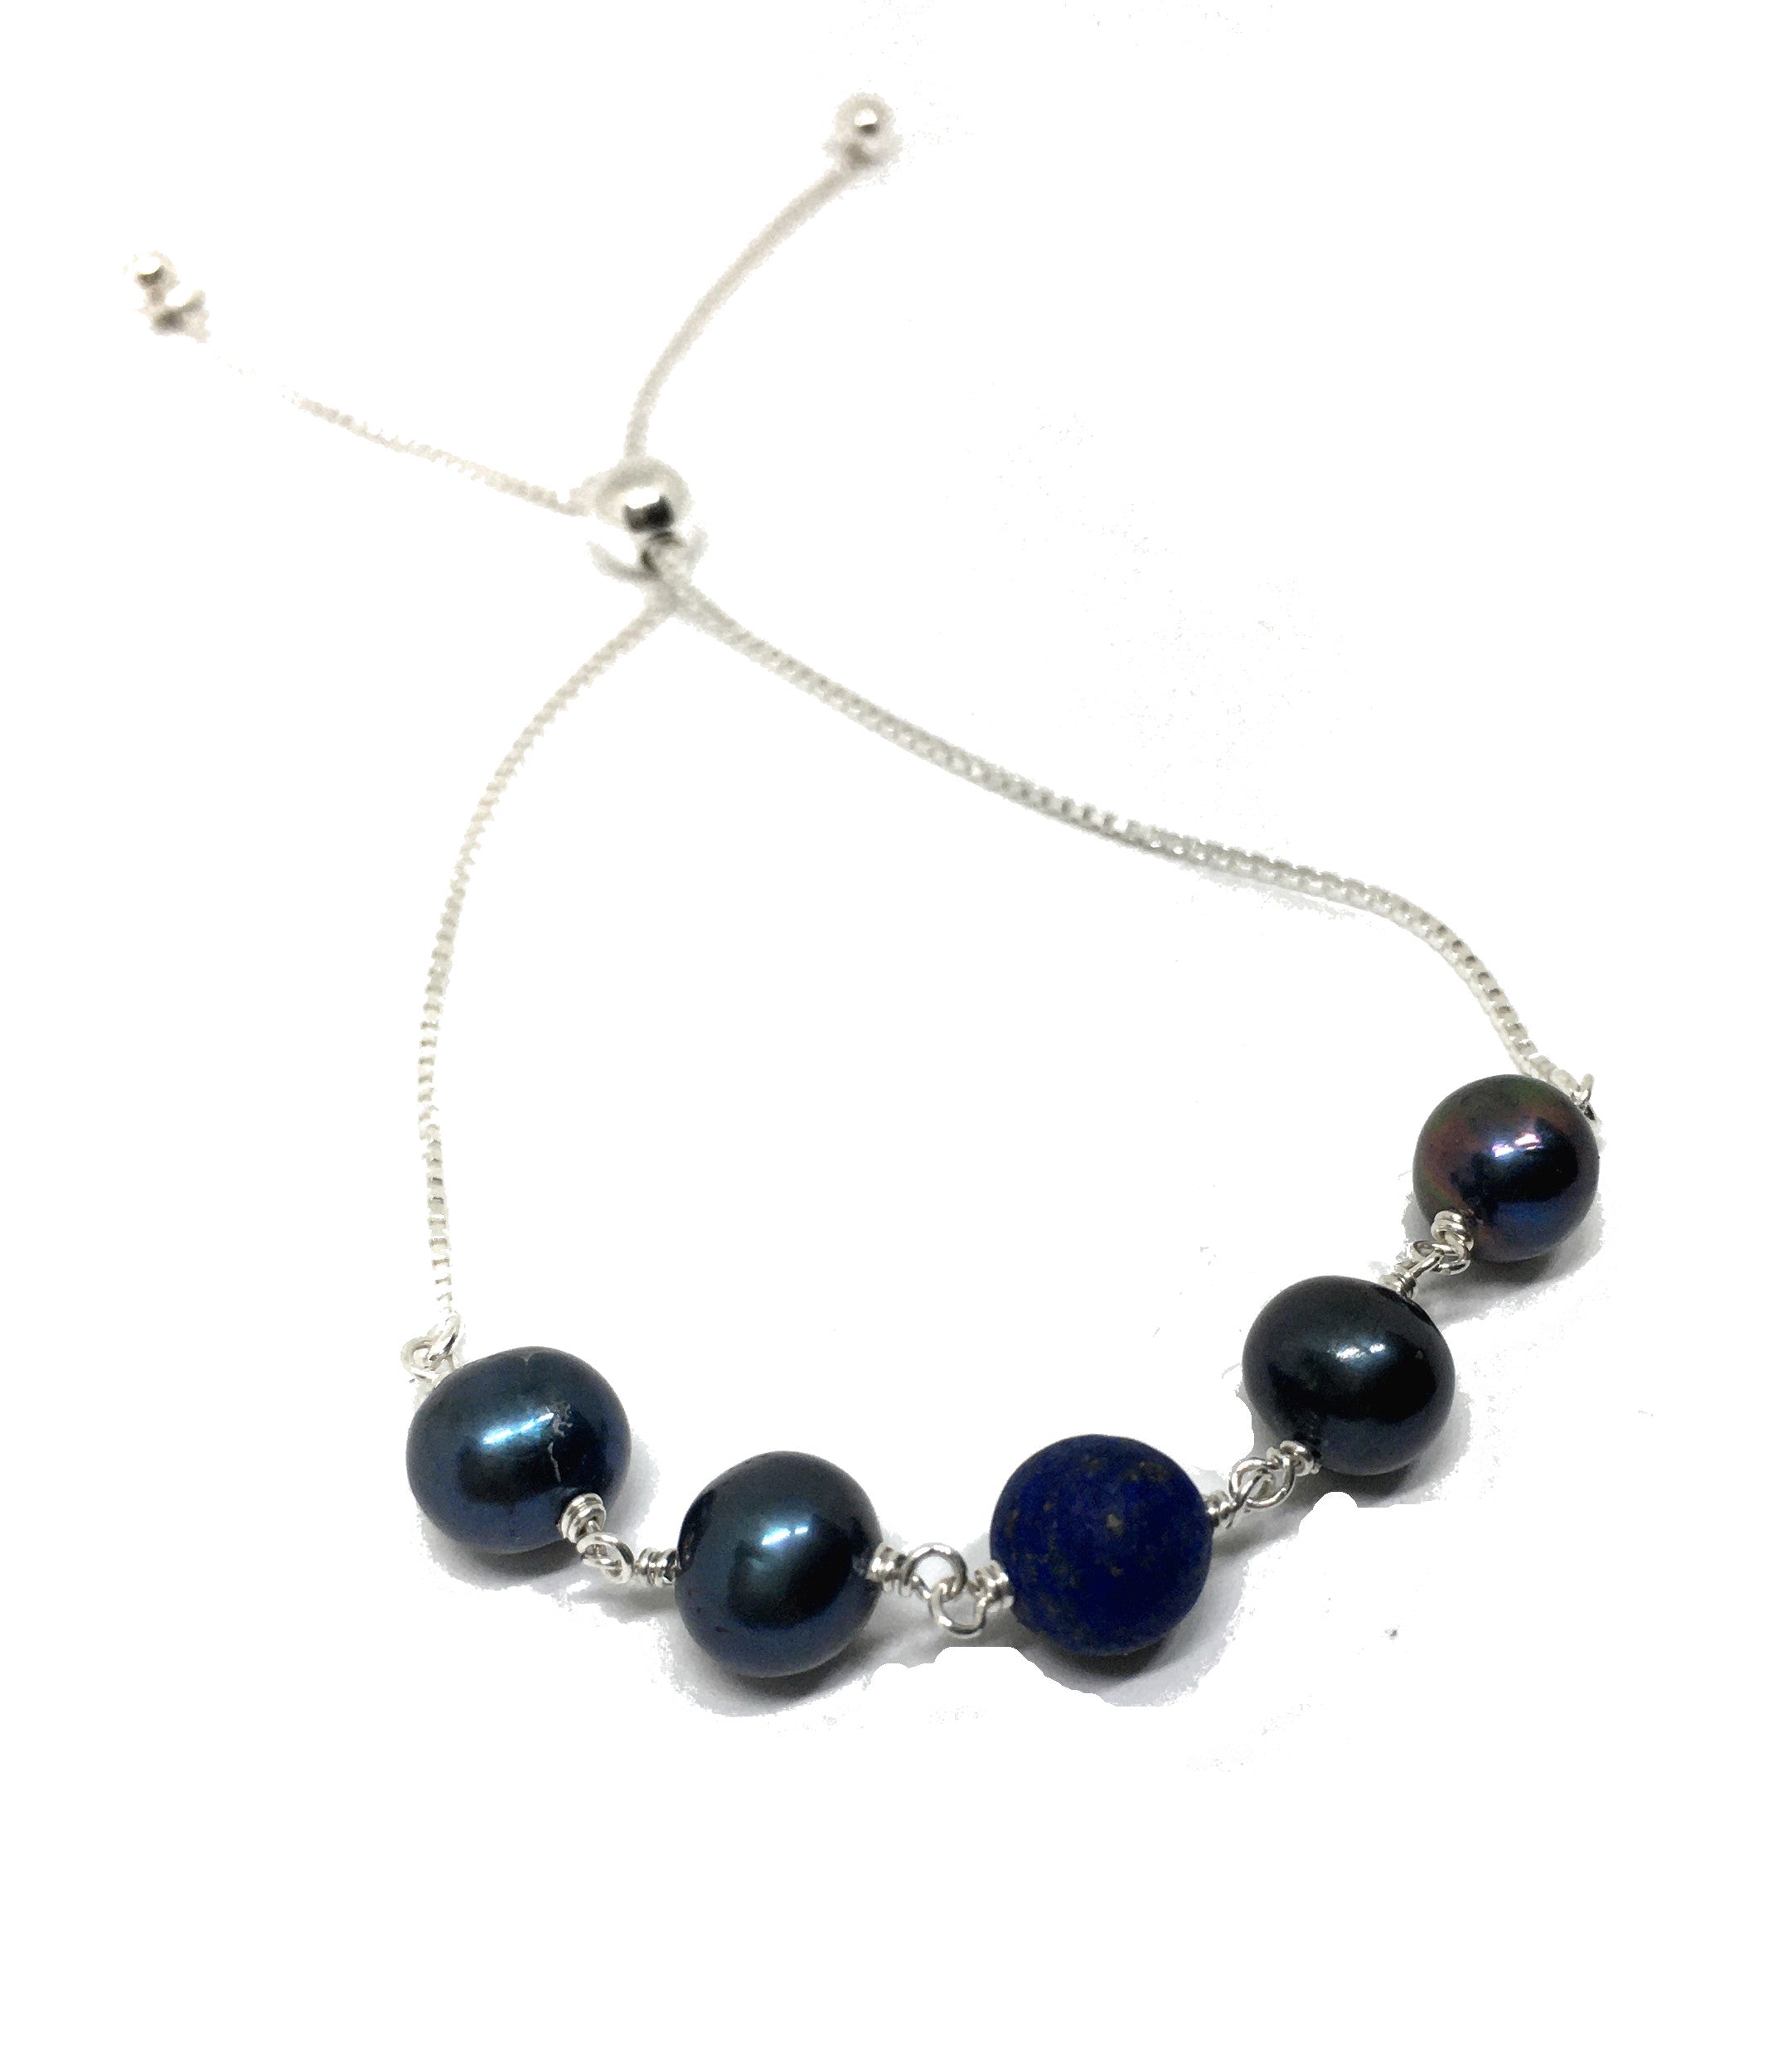 Lapis Lazuli and Black Pearl Bolo Bracelet in Sterling Silver